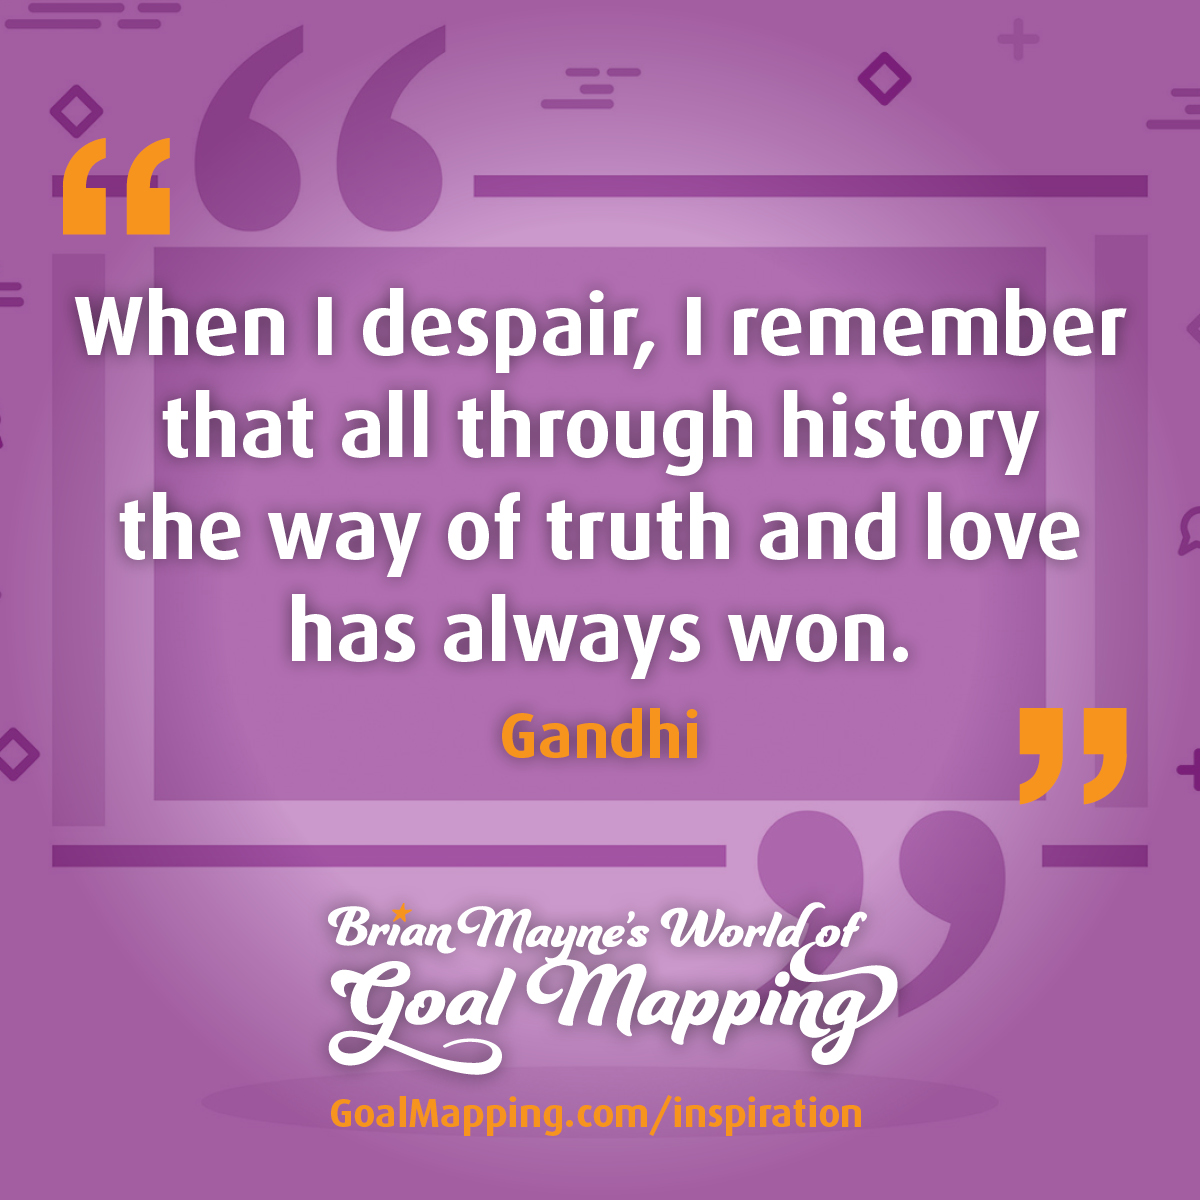 "When I despair, I remember that all through history the way of truth and love has always won." Gandhi